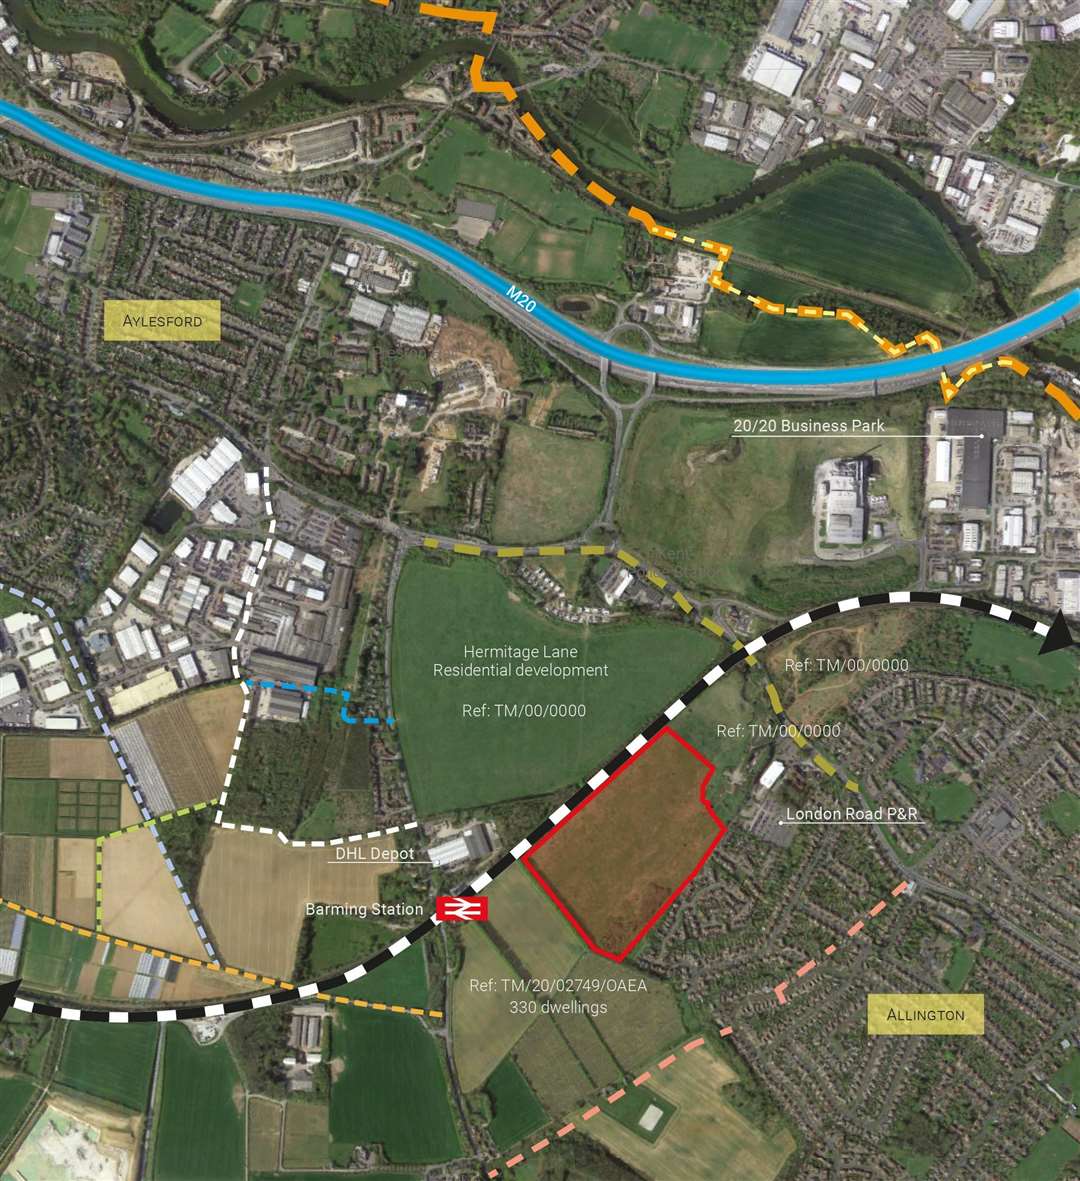 The red outline shows the proposed development site adjacent to the rail-line